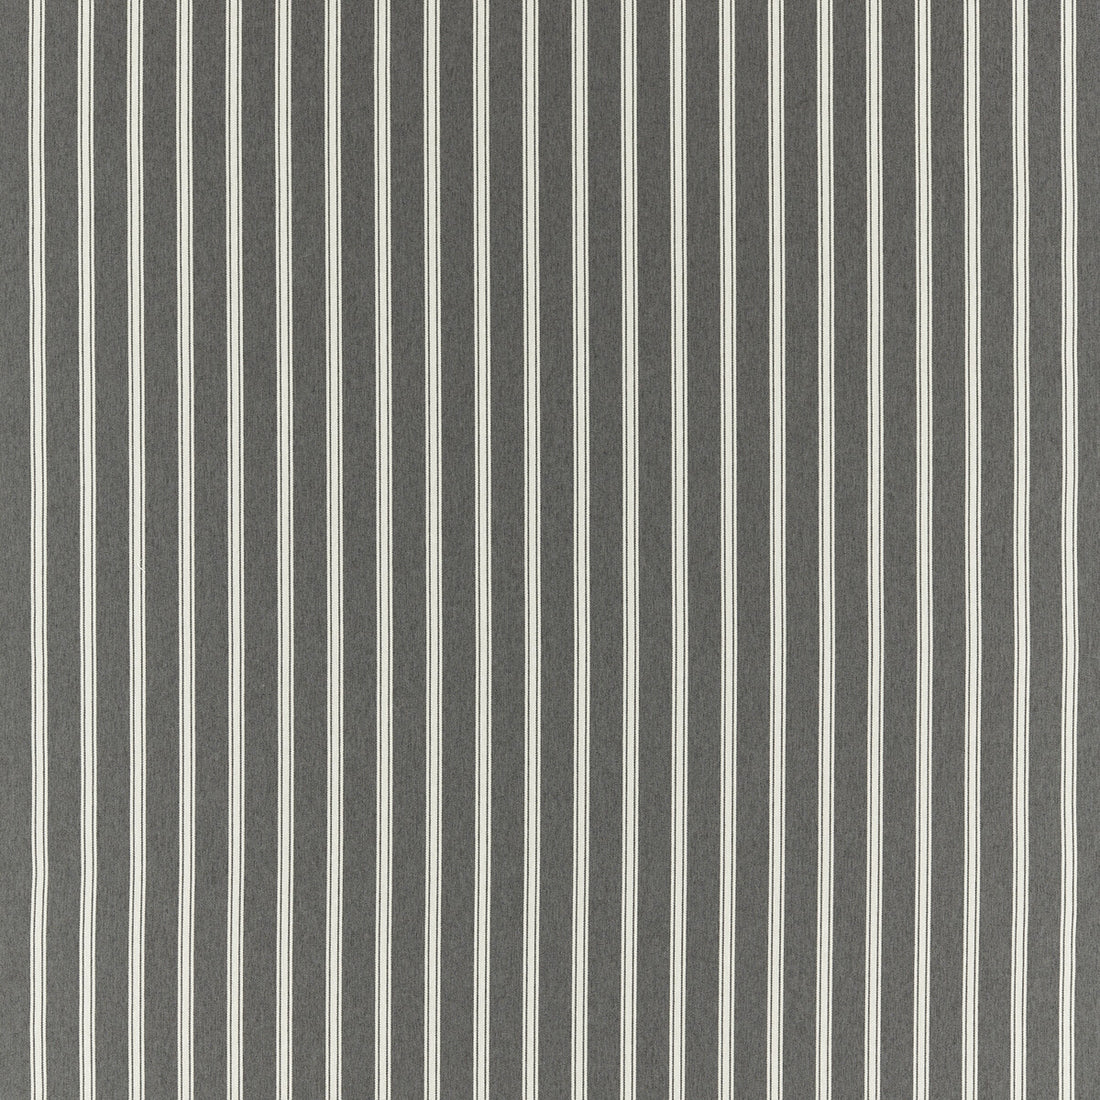 Anderson fabric in charcoal color - pattern F1567/01.CAC.0 - by Clarke And Clarke in the Clarke &amp; Clarke Burlington collection